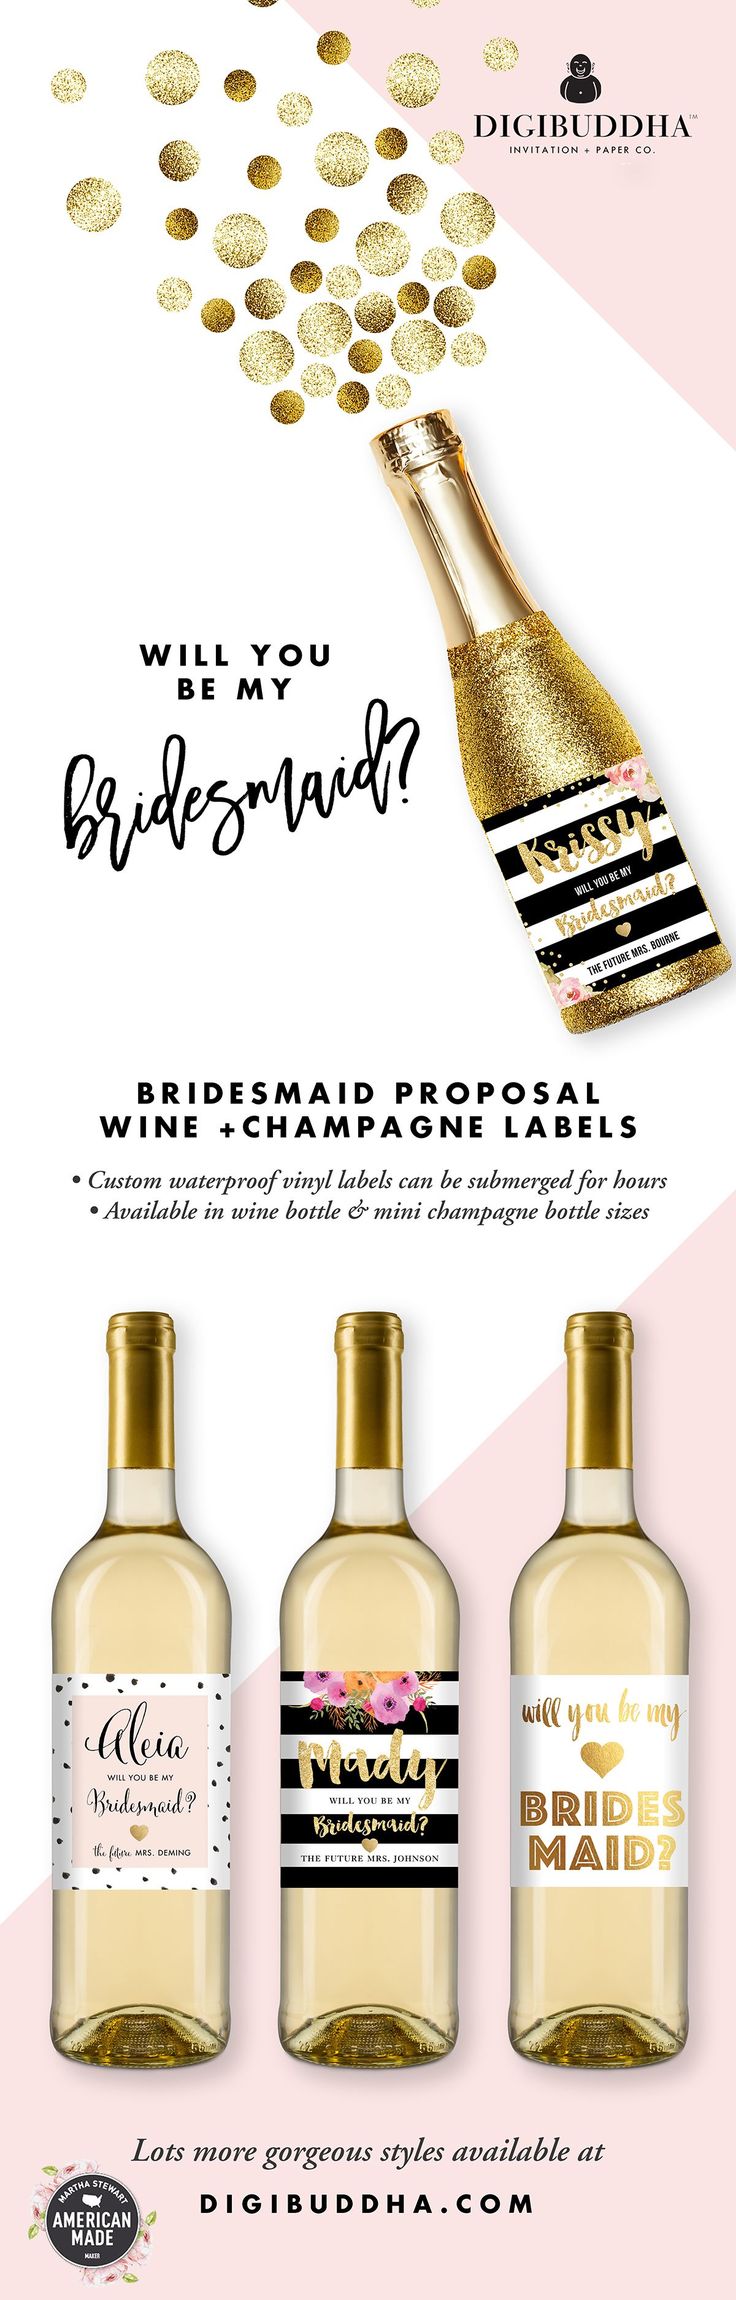 Will you be my bridesmaid? Bridesmaid proposal wine labels are a gorgeous, fun w...